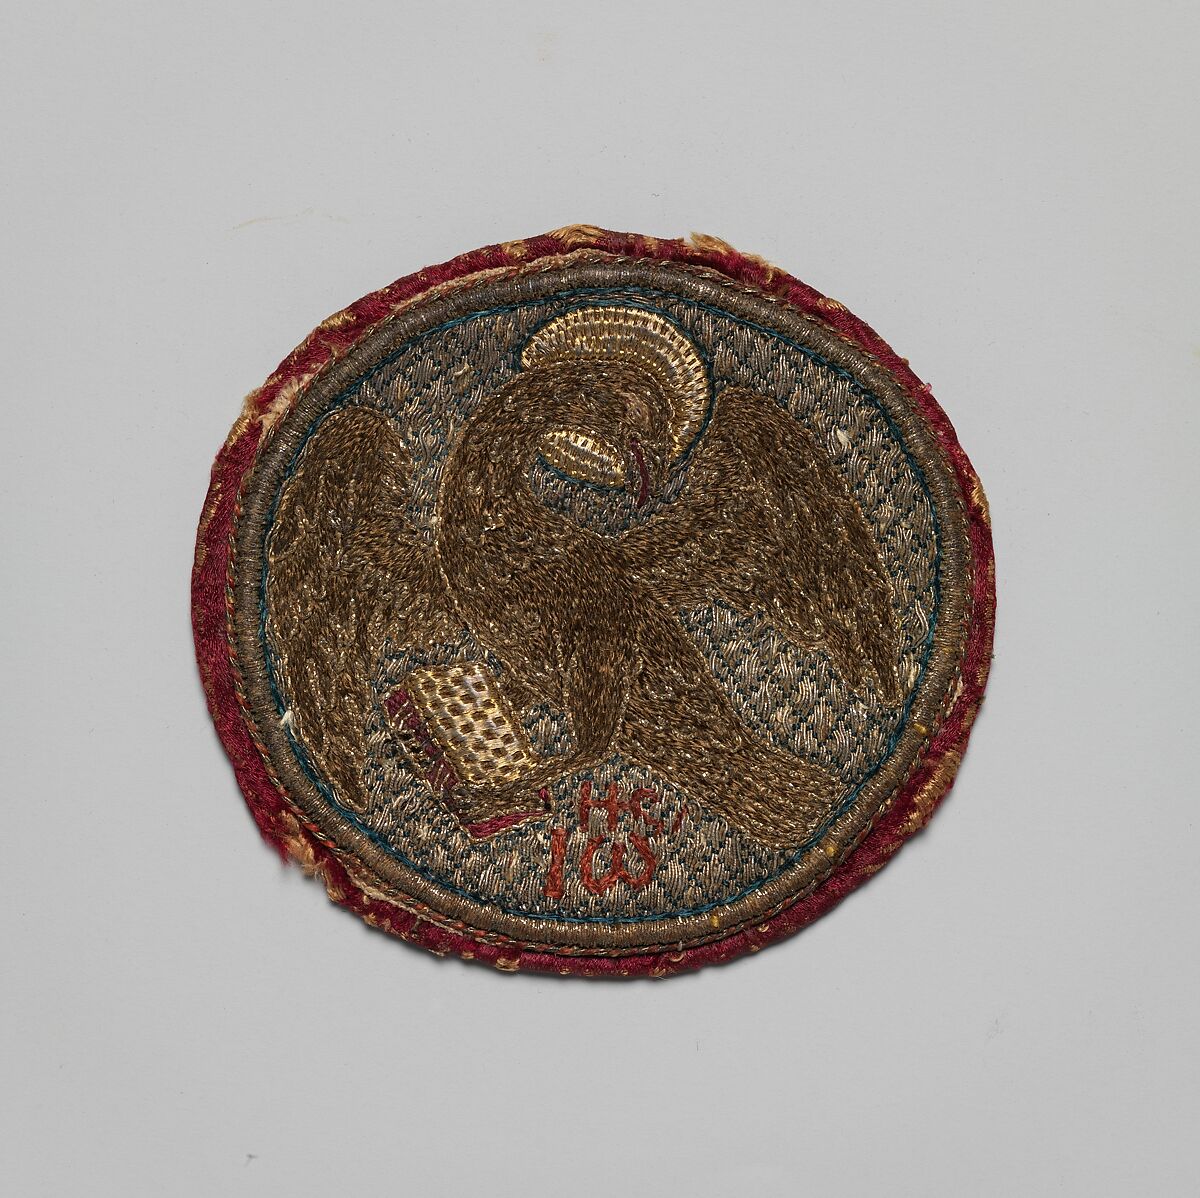 Embroidered Medallion, Silk and metal thread embroidery on a foundation of linen plain weave, Byzantine 